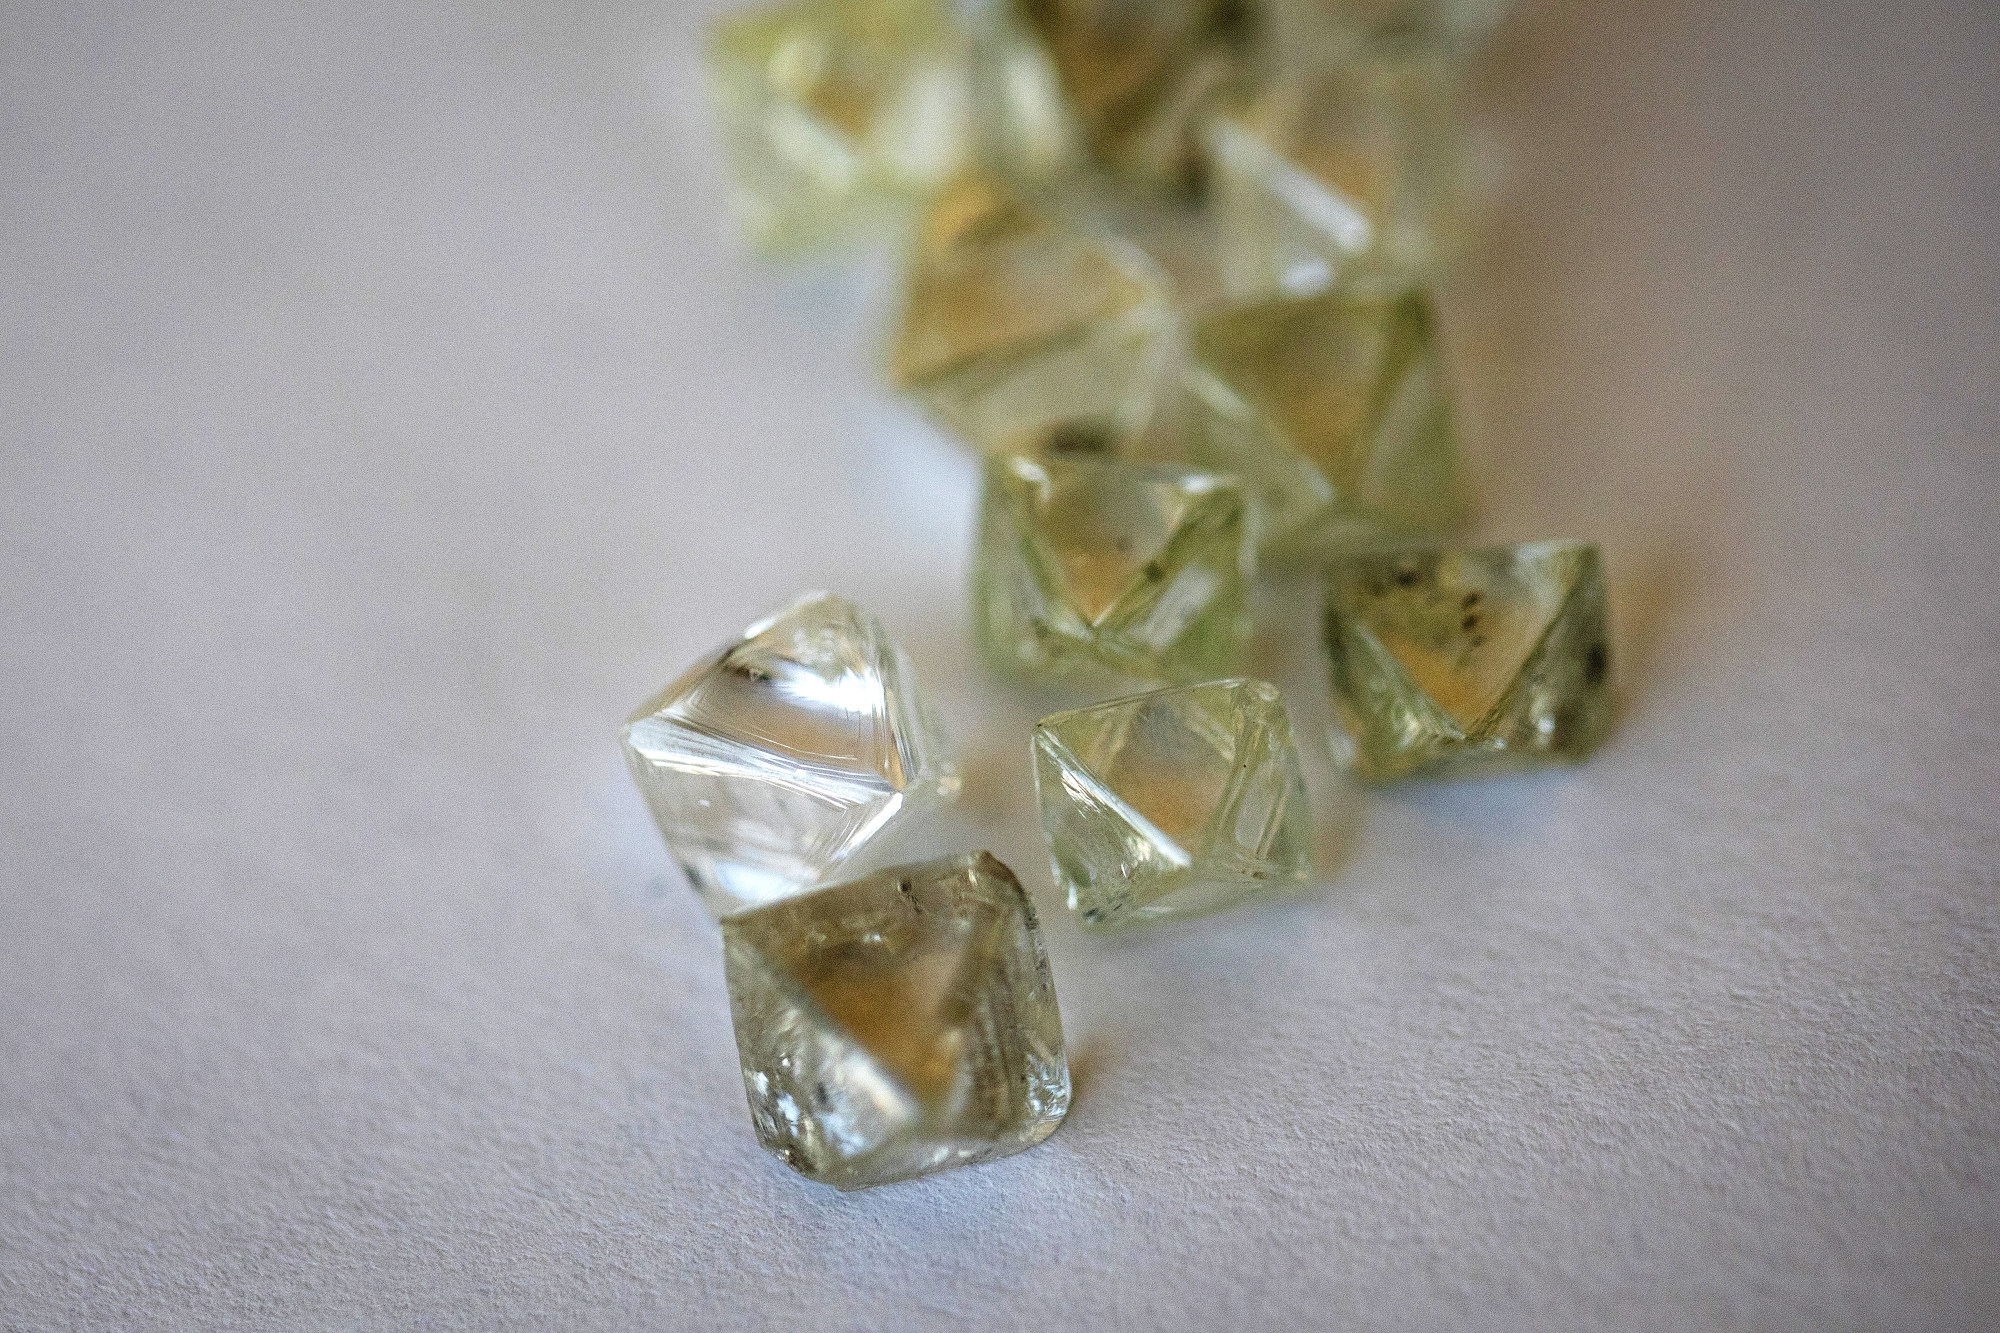 Bling ka-ching: De Beers aggressively hikes diamond prices